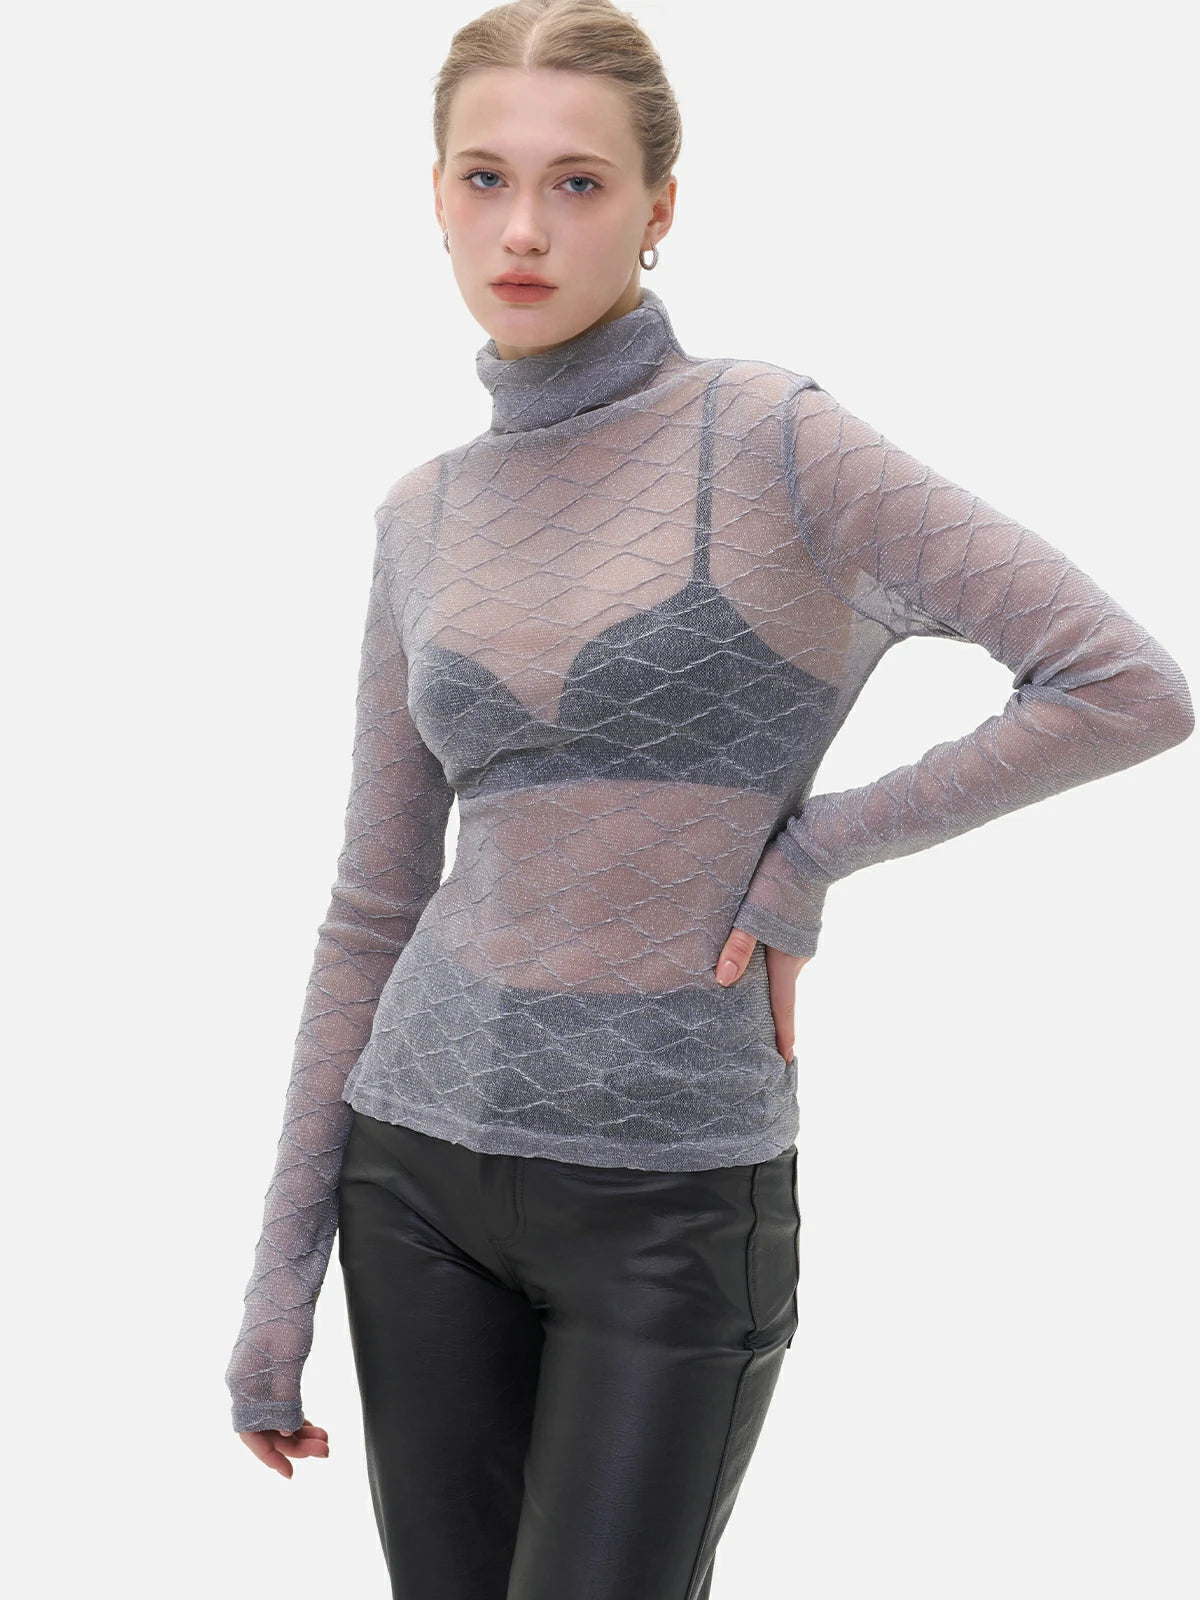 Chic feminine style embodied in a sheer base layer adorned with a delicate diamond pattern.